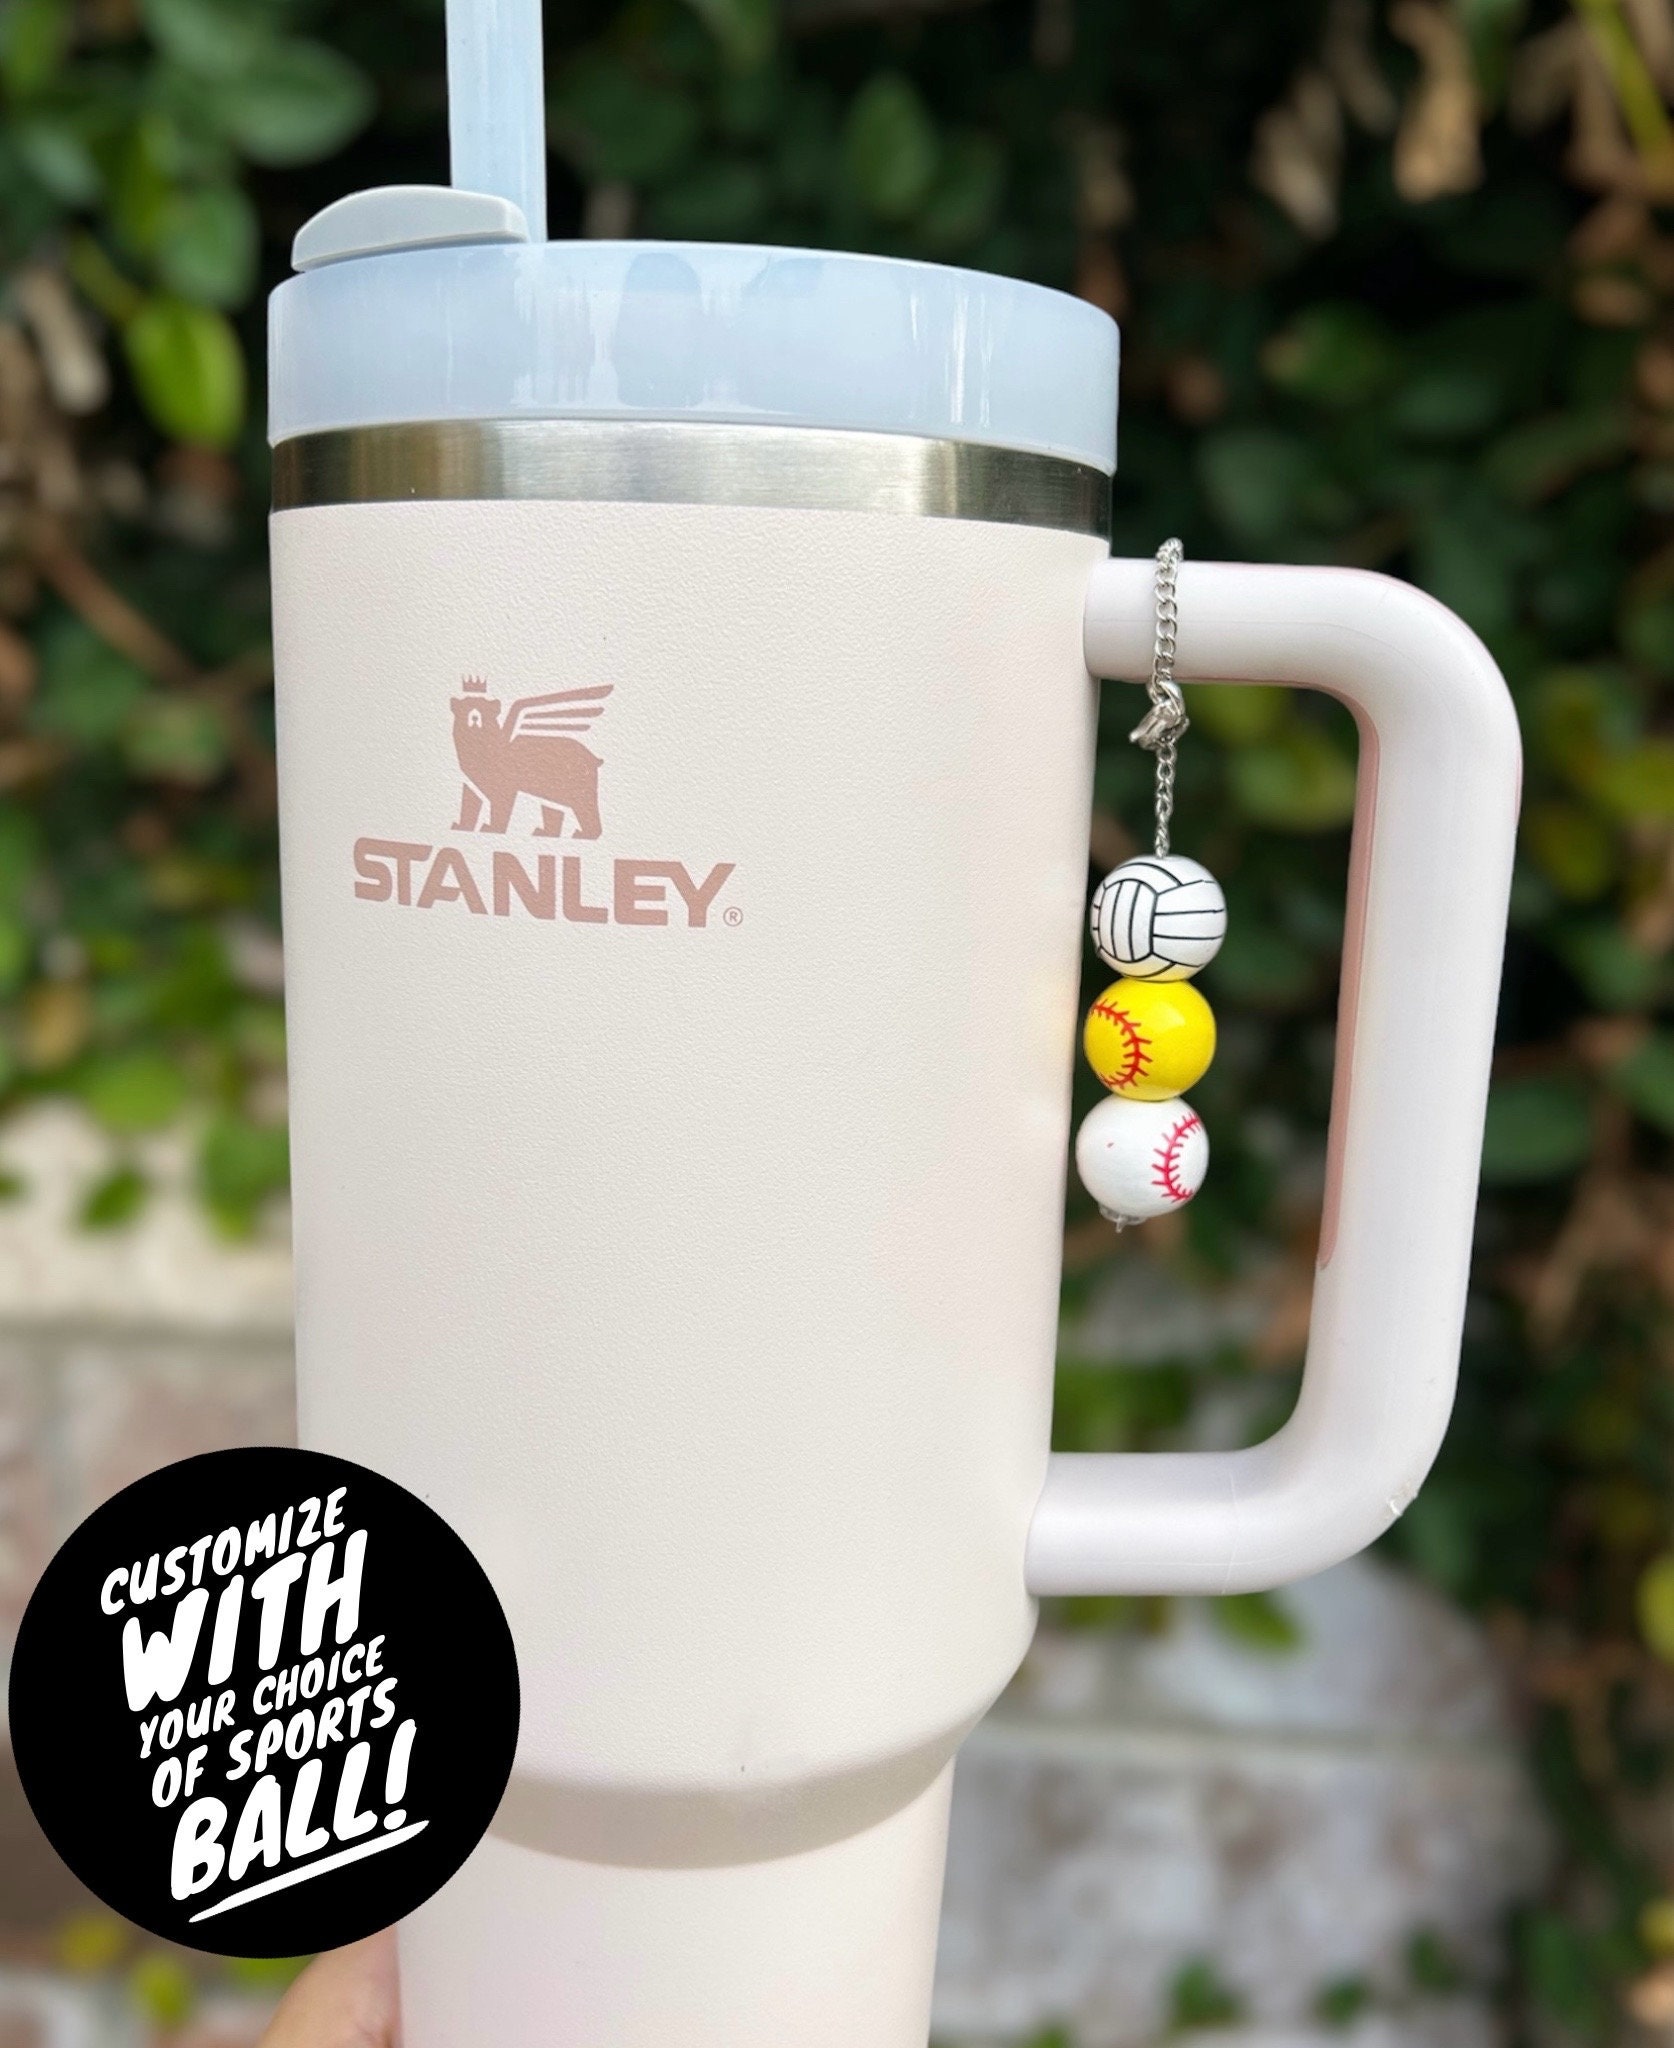  Compatible with Christmas Stanley Cup Accessories for Stanley  30 40oz Tumbler, Stanley Accessories Includes 10mm Stanley Straw Cover,  Stanley Boot and Merry Christmas Stickers (4 Pack): Home & Kitchen